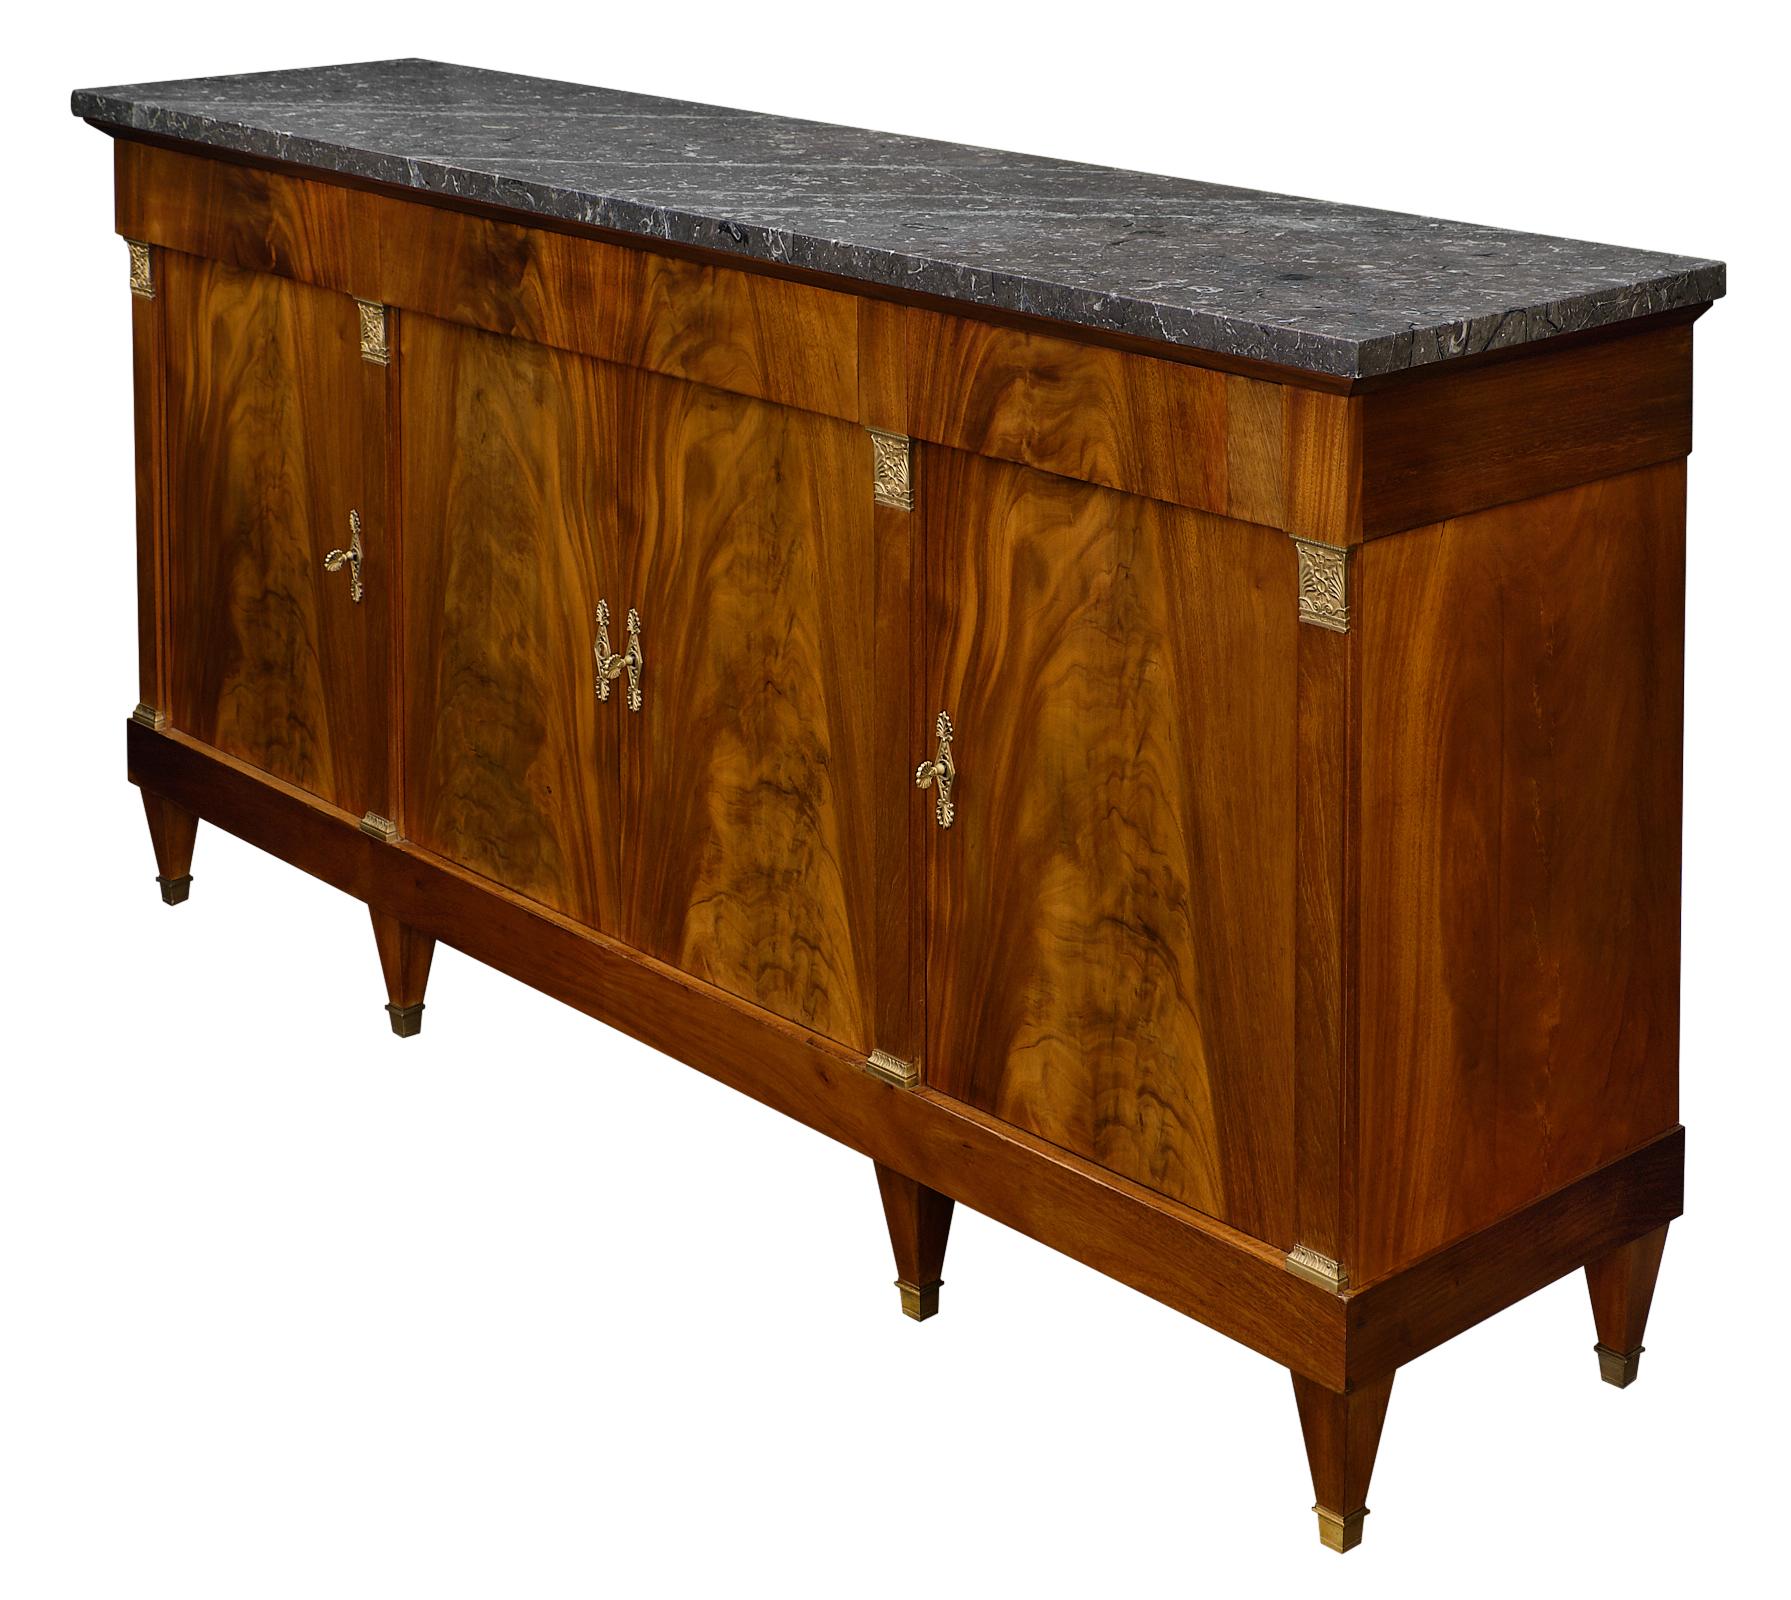 Antique flamed mahogany French Directoire buffet with gray marble top. This piece is made of Cuban flamed mahogany enhanced with acanthus leaf decor in bronze. The gray turquin marble top is original and in excellent antique condition. Three